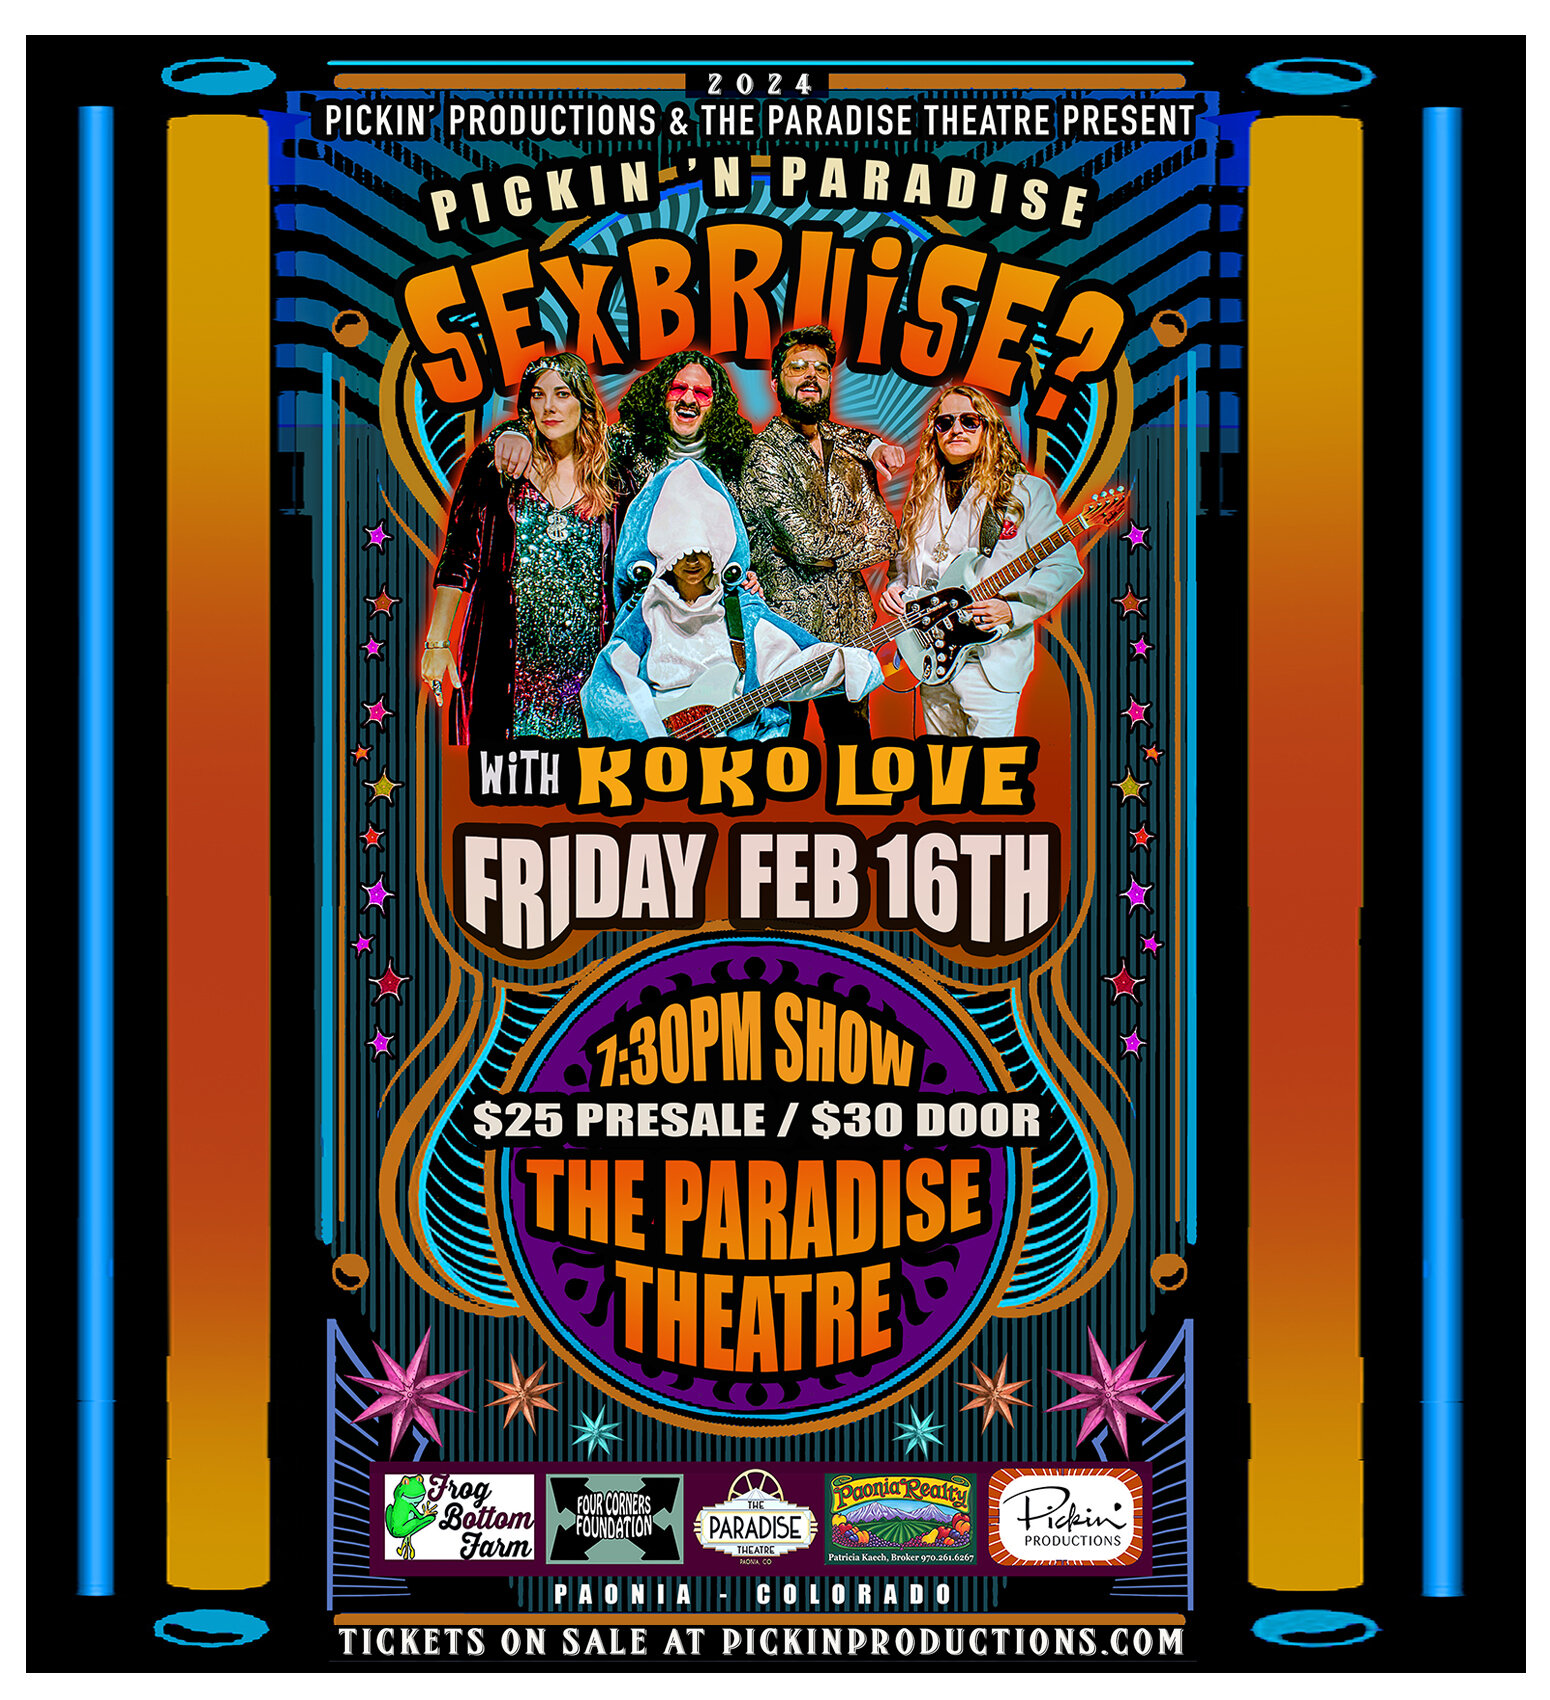 Join us for the second show in our Pickin 'n Paradise series featuring Sexbruise? with special guest @djkokolove on Friday, Feb. 16th at Paradise Theatre of Paonia.

Showtime 7:30pm. Tickets $25 presale / $30 door.

Purchase tickets here: https://www